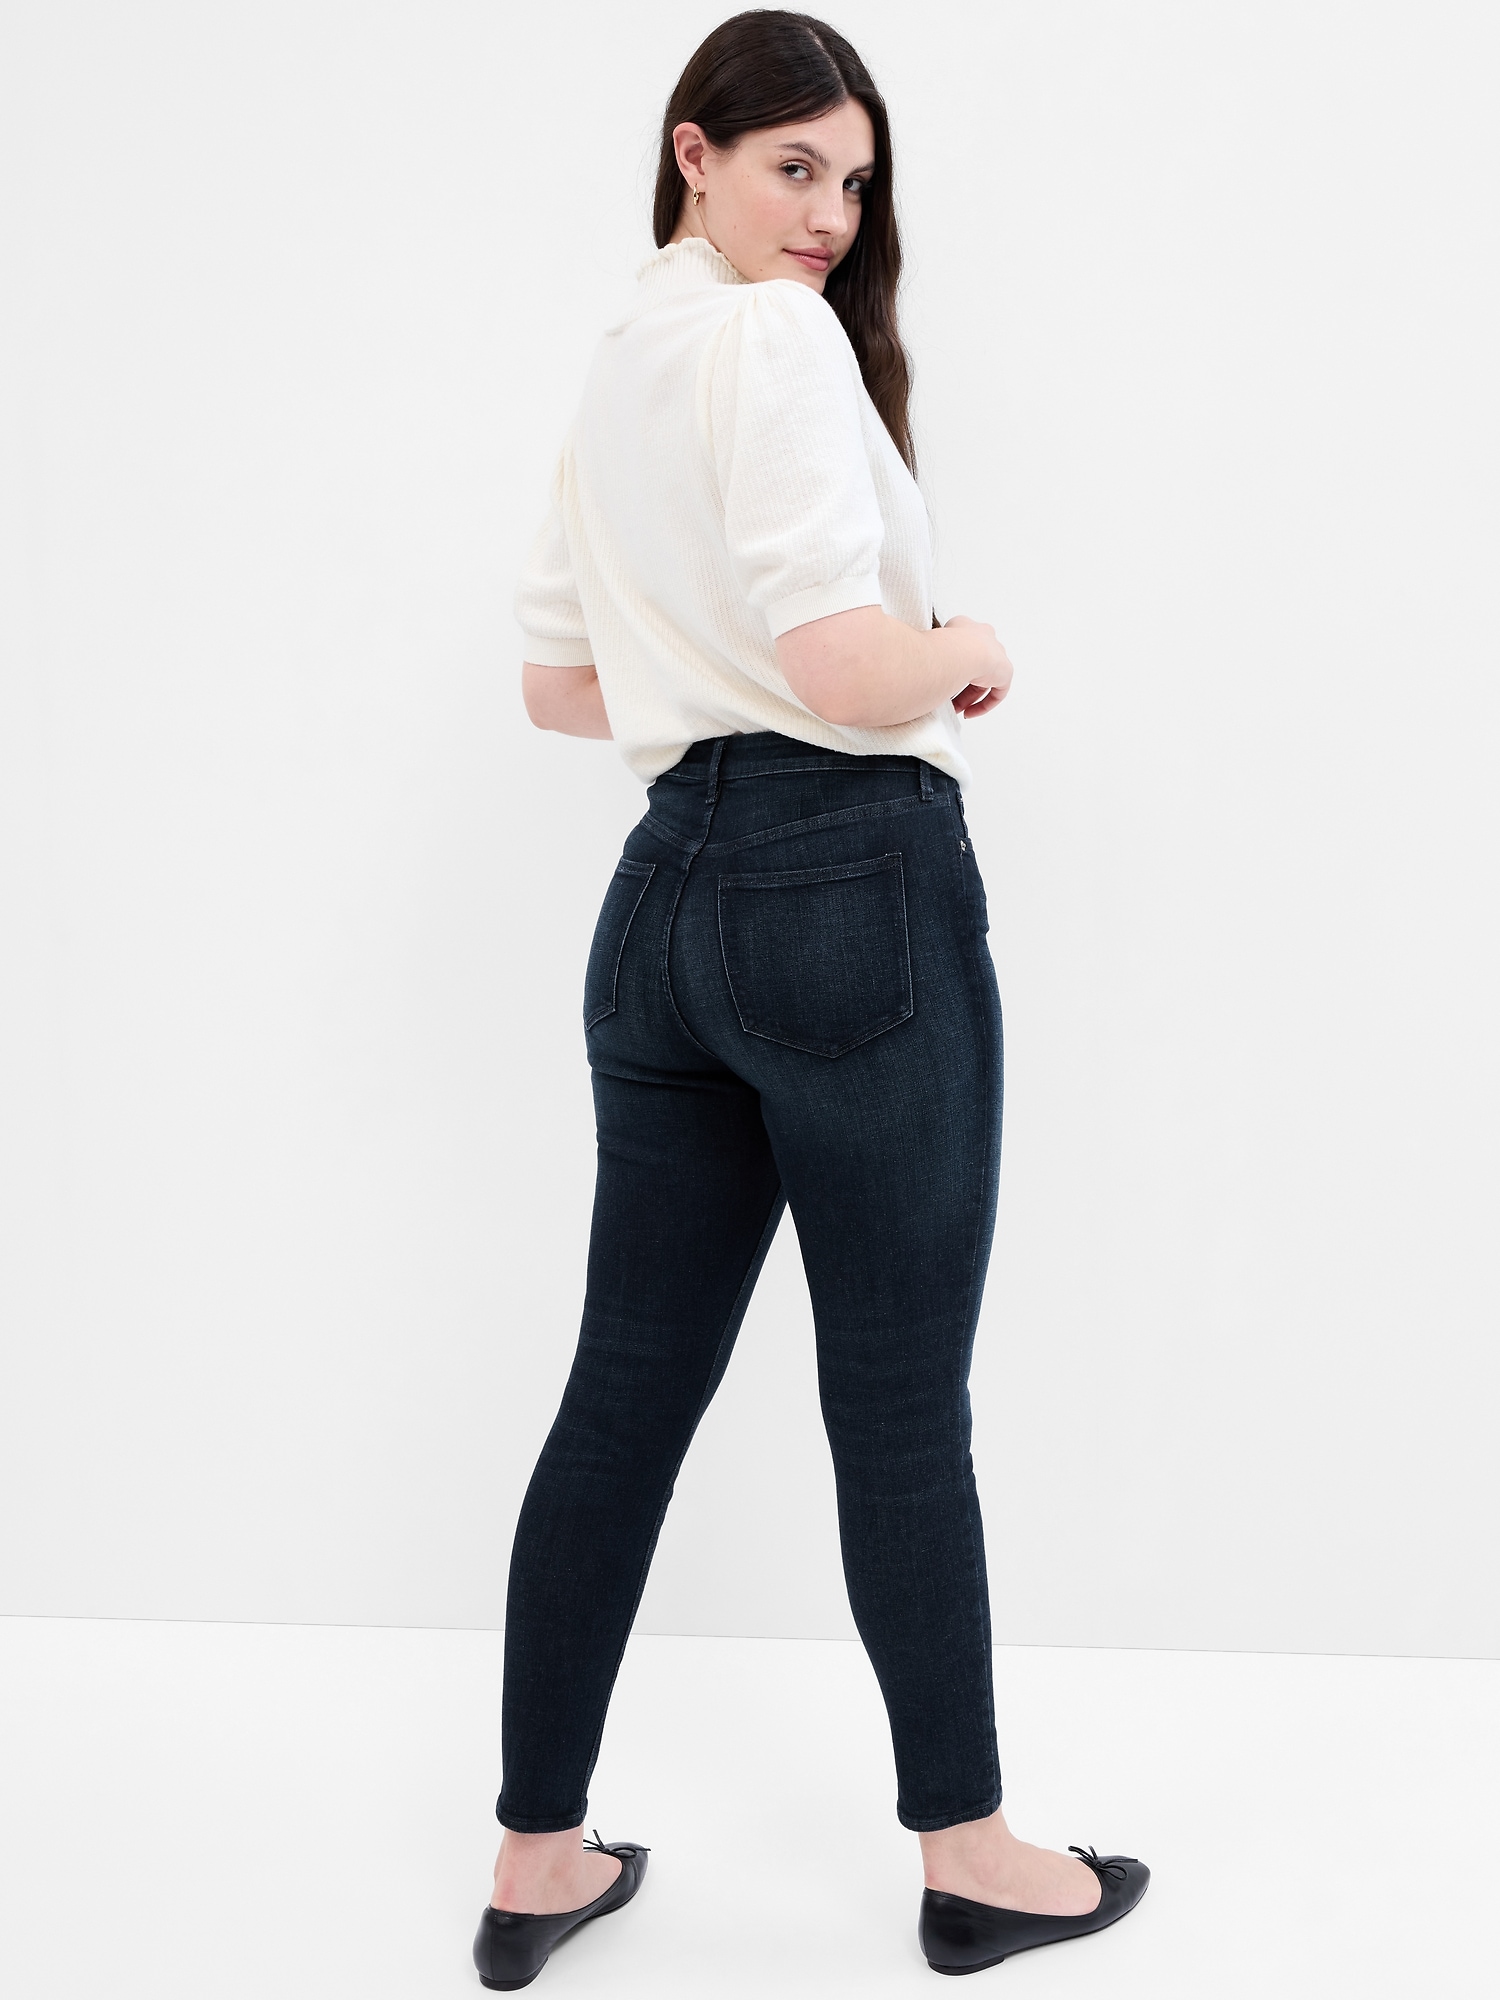 High Rise Universal Legging Jeans with Washwell | Gap Factory